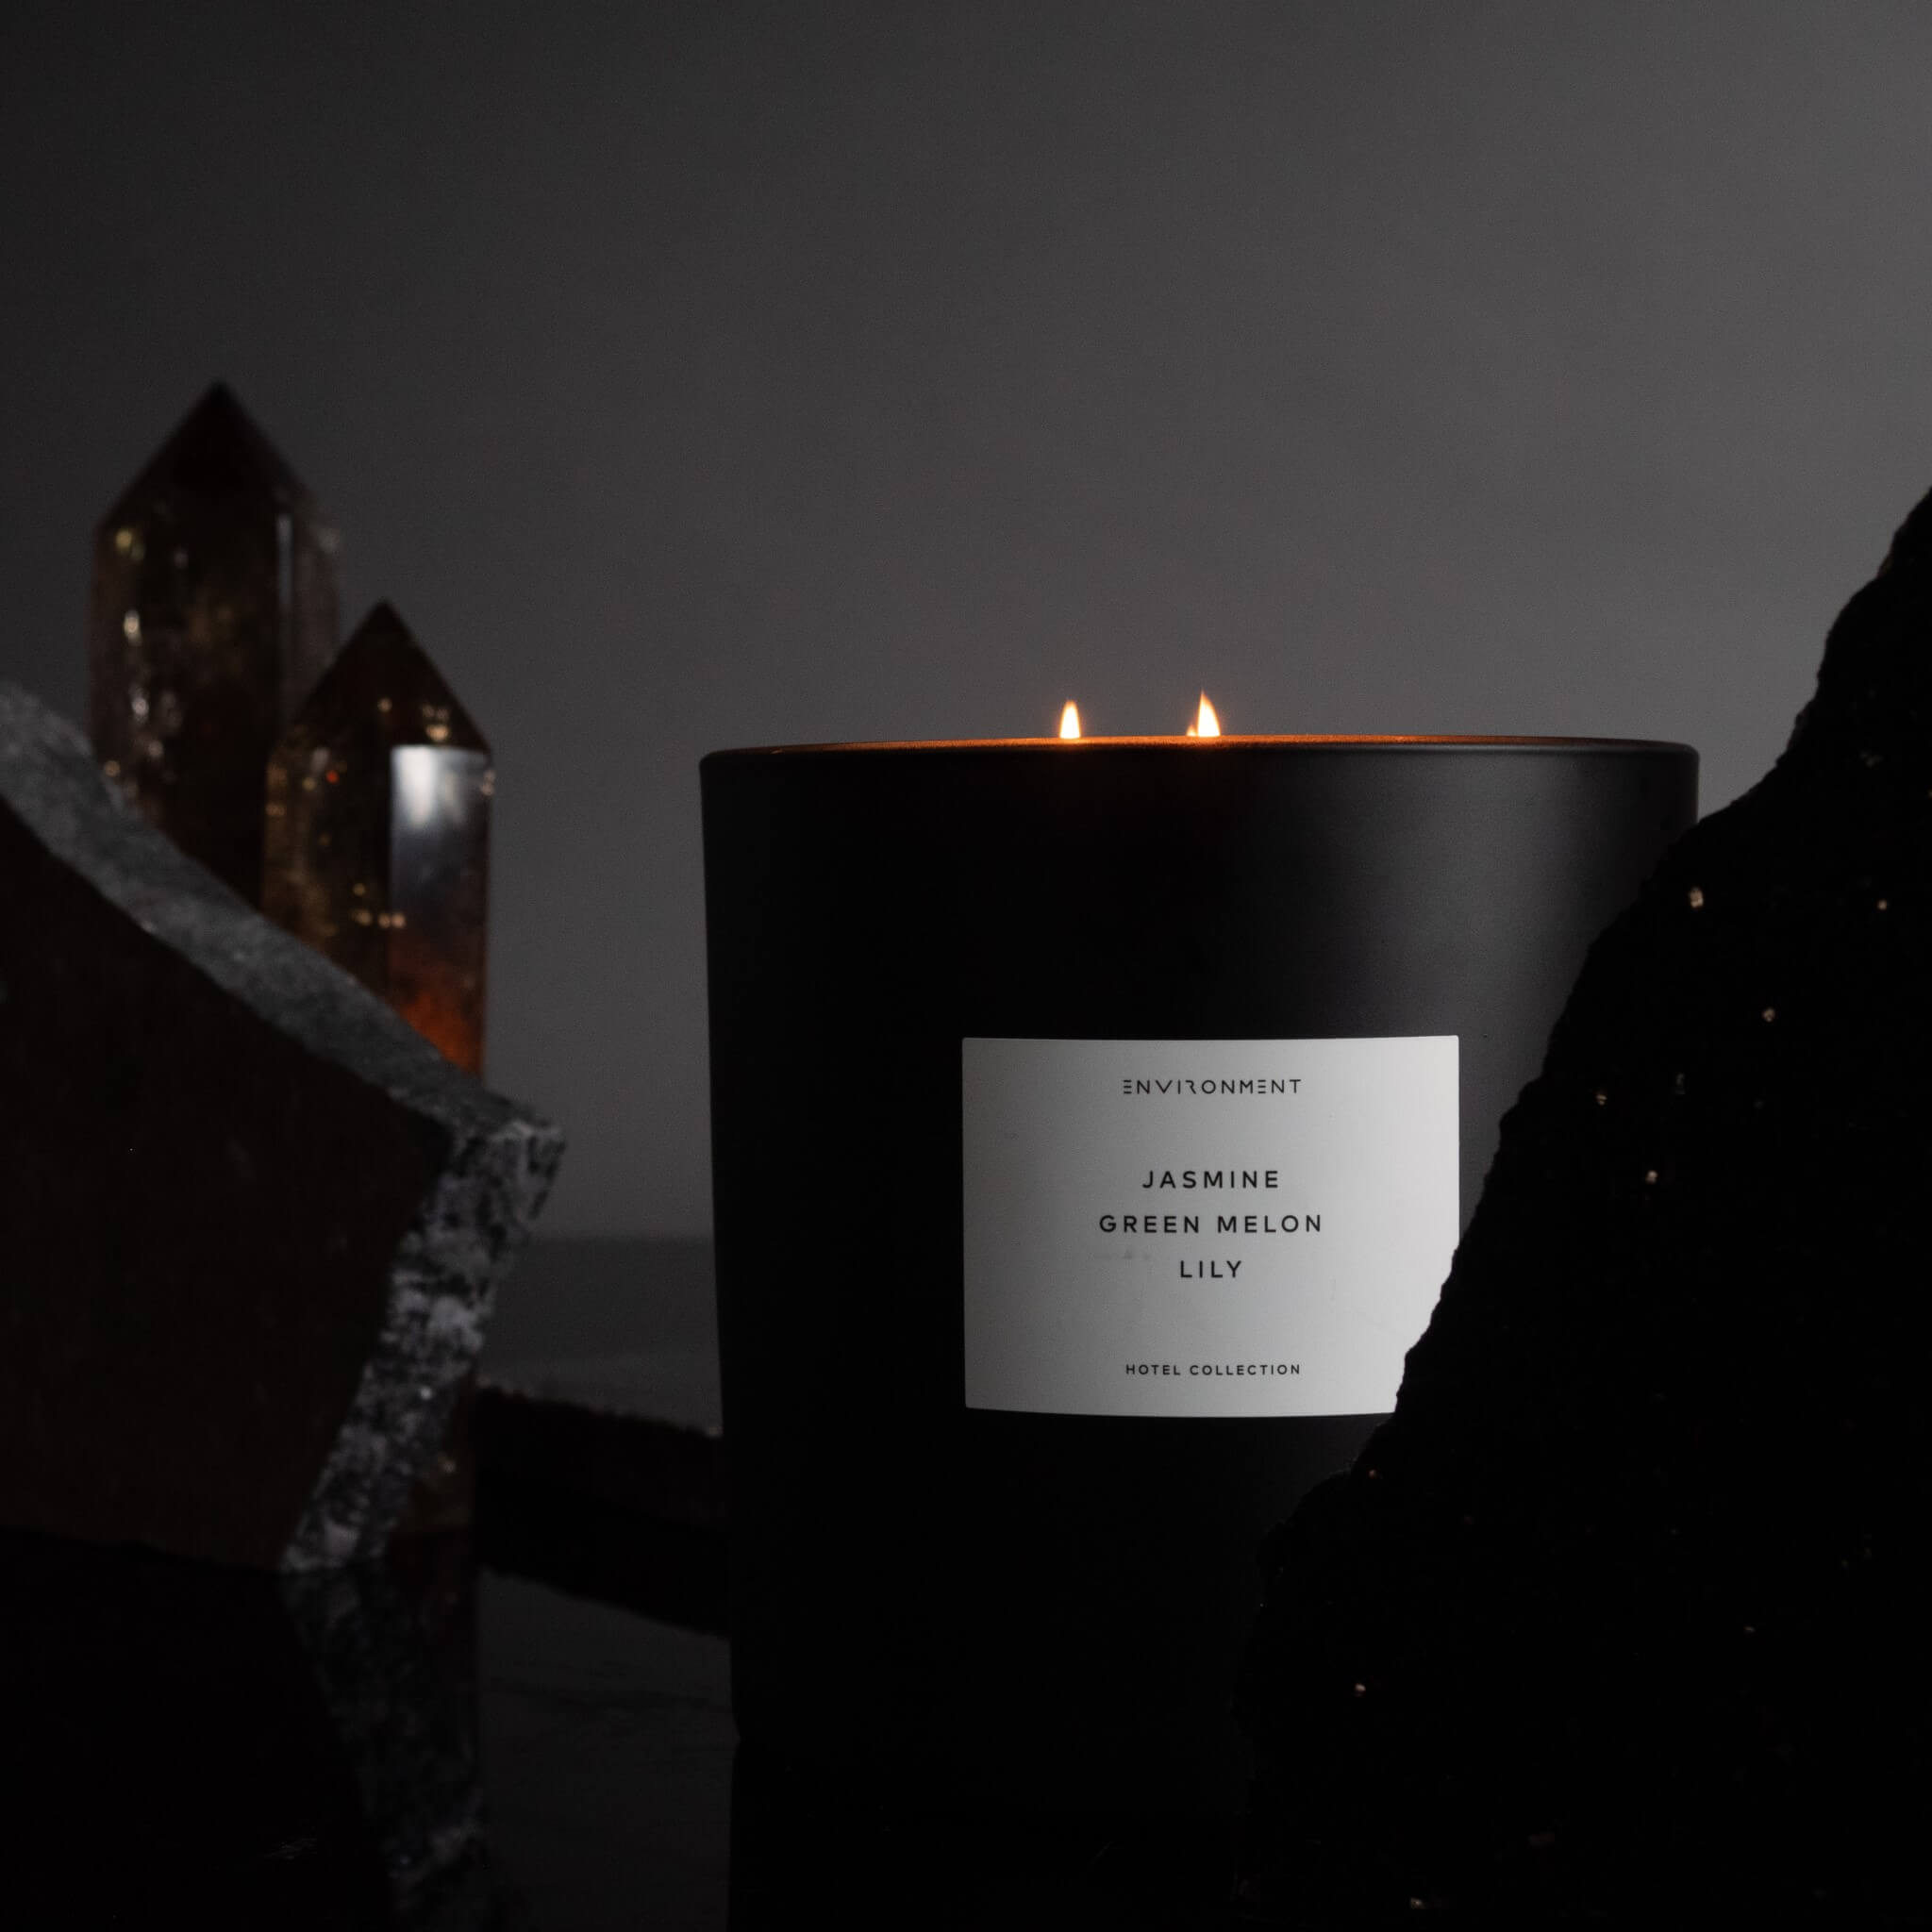 55oz Blonde Woods | Rose | Black Fig Candle (Inspired by The EDITION Hotel®)